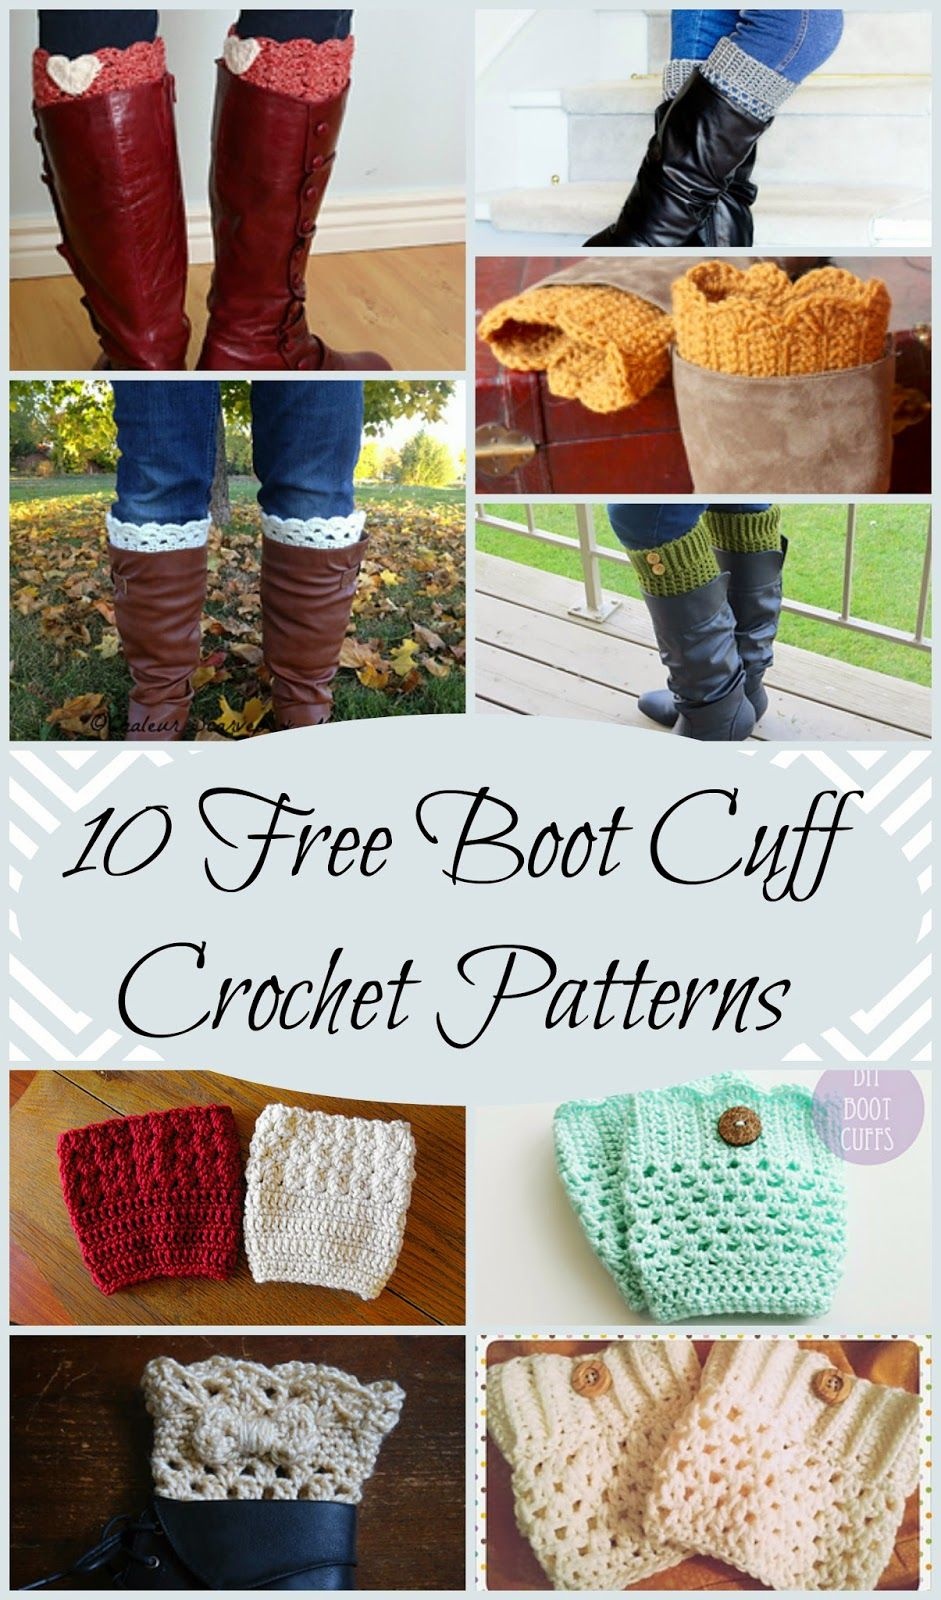 10 Free Boot Cuff Crochet Patterns Perfect For A Quick And Easy - Free Printable Crochet Patterns For Boot Cuffs